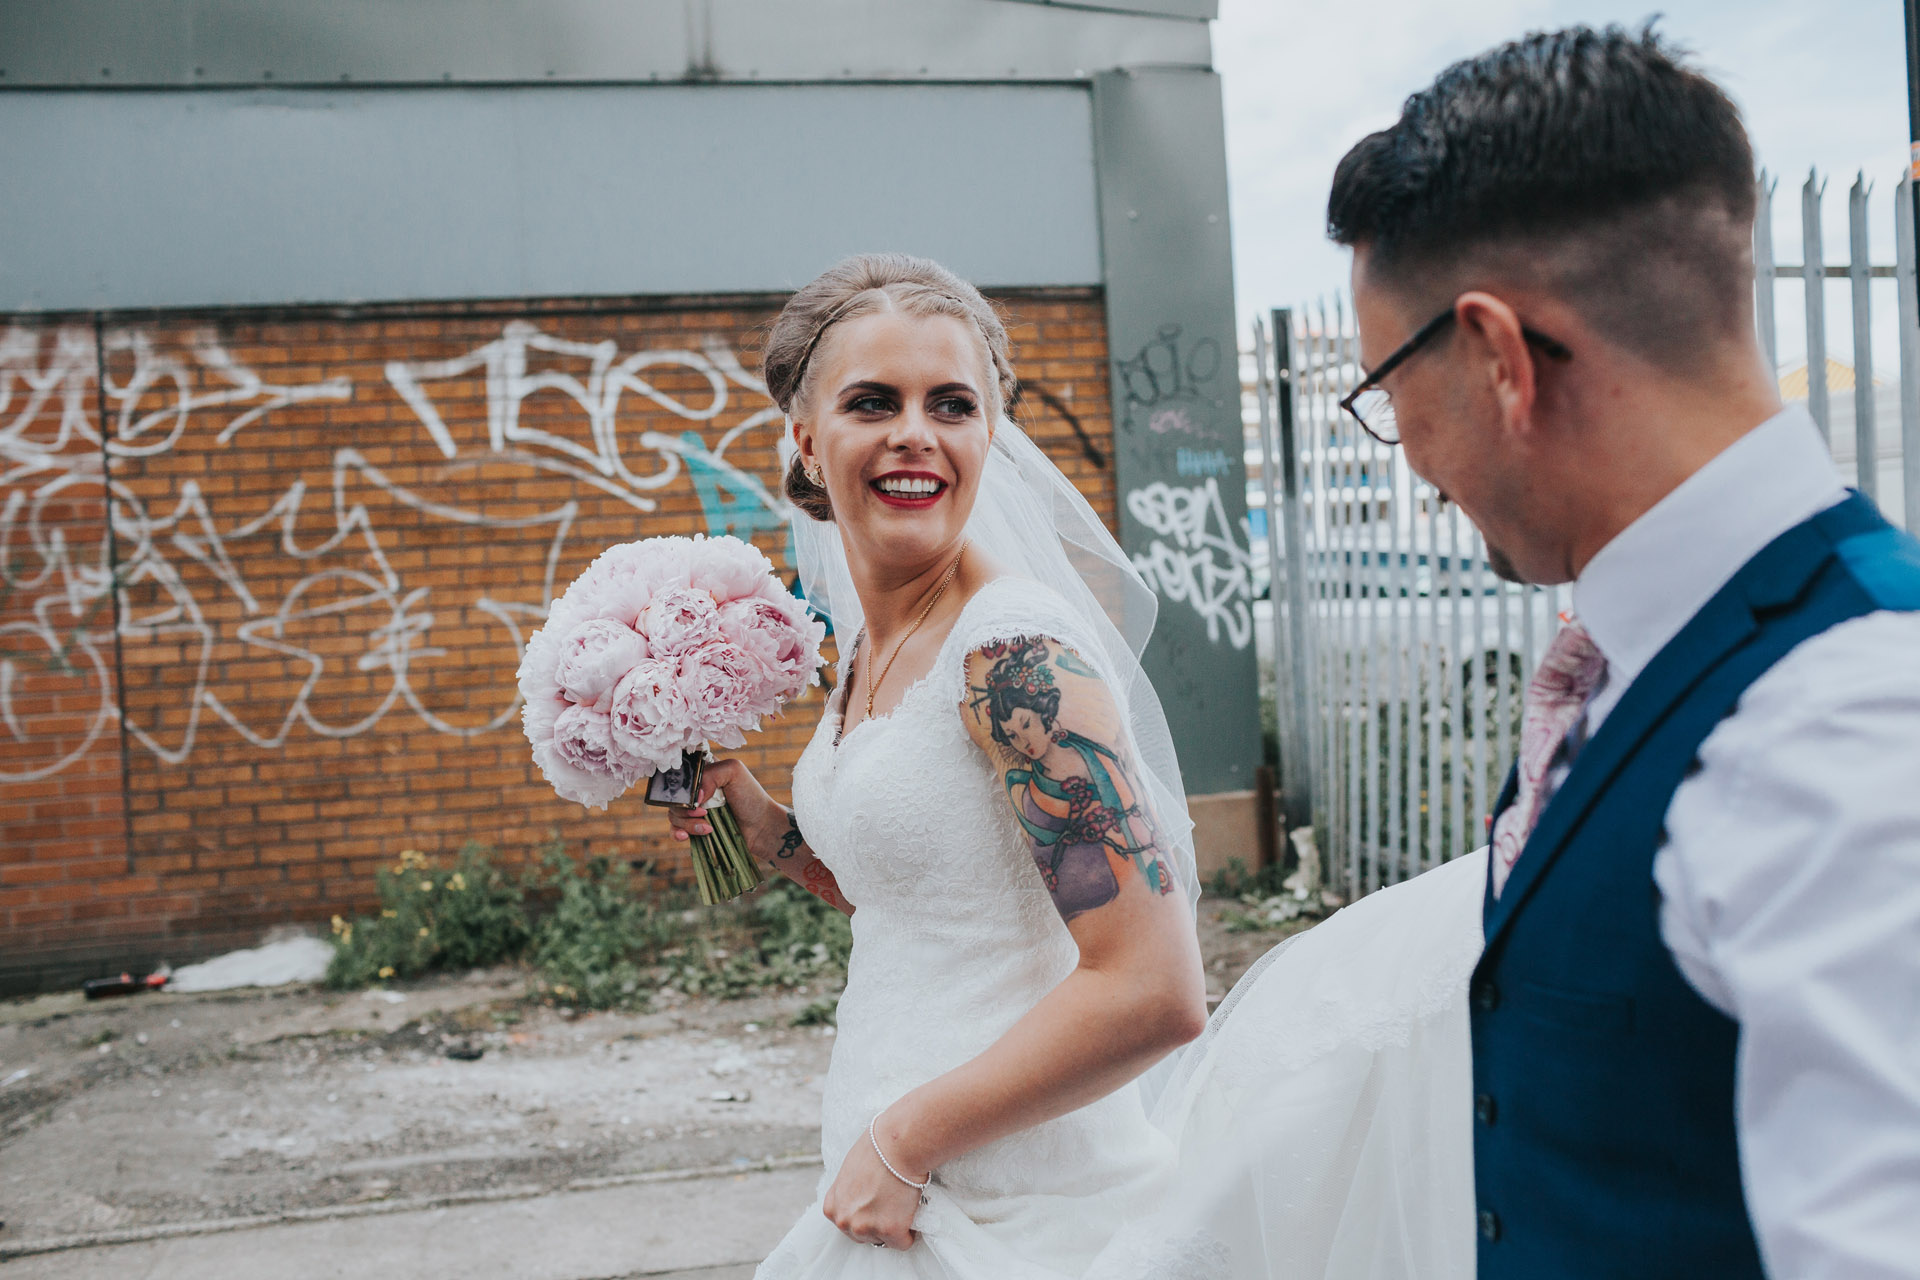 Bride looks to Groom as they walk through Manchester. Graffiti tags in back ground. 